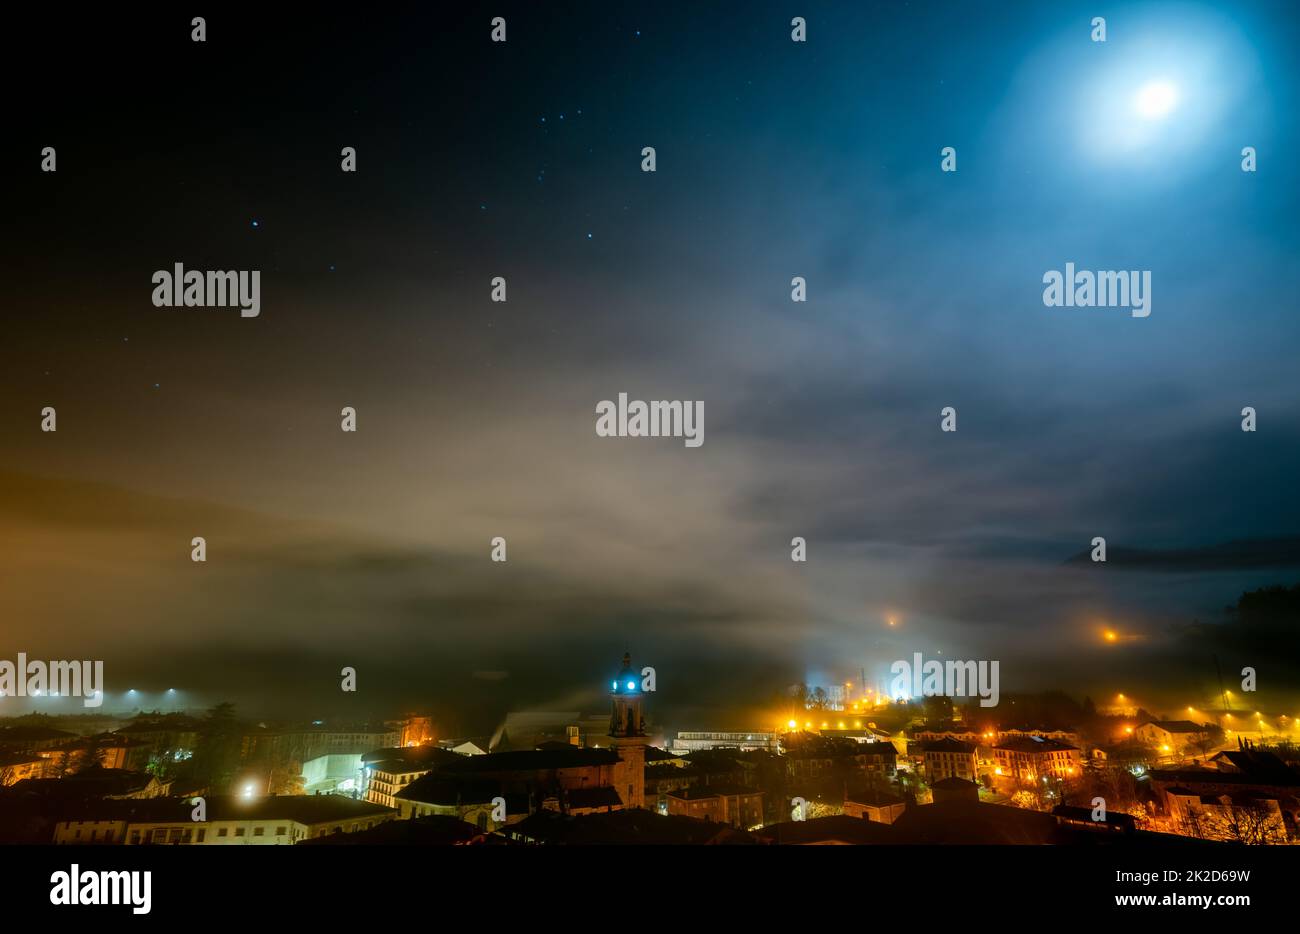 Cityscape in the night with stars in the sky. City in mist. Europe building in mist. City and orange light in the night. City covered with fog. Foggy sky. Old town in Europe. Picturesque cityscape. Stock Photo